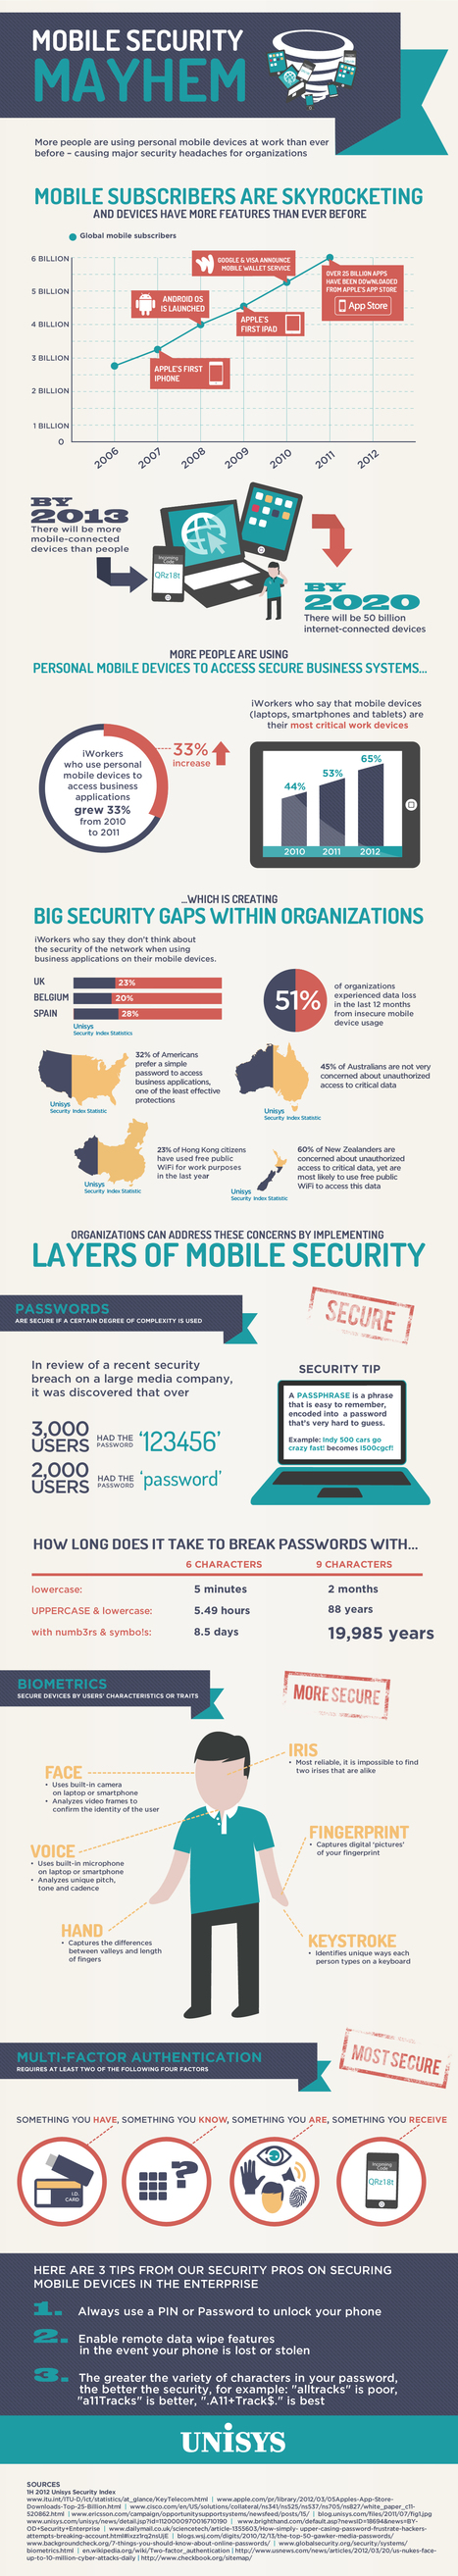 What Apple and Google are not Telling you About Mobile Device Security (infographic) - Forbes | ICT Security-Sécurité PC et Internet | Scoop.it